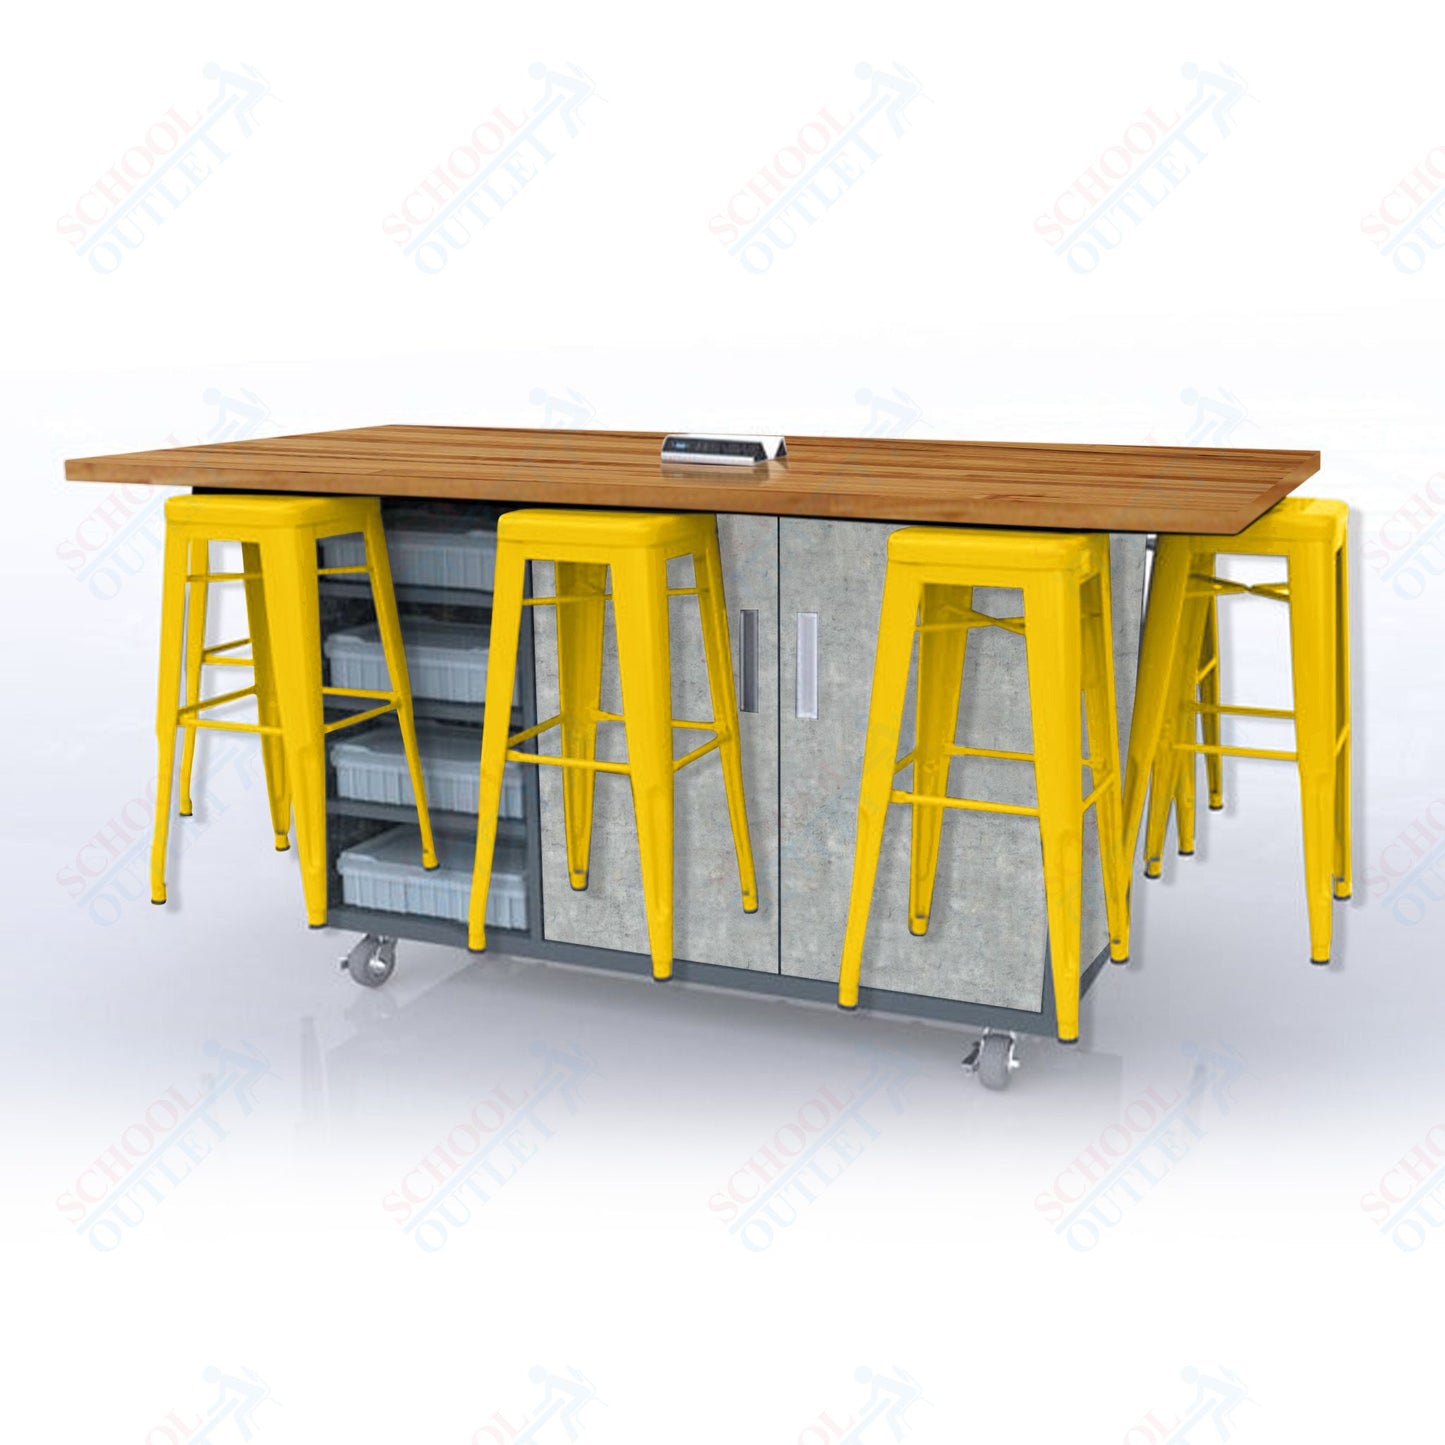 CEF ED8 Table 42"H Butcher Block Top, Laminate Base with  8 Stools, Storage bins, and Electrical Outlets Included.